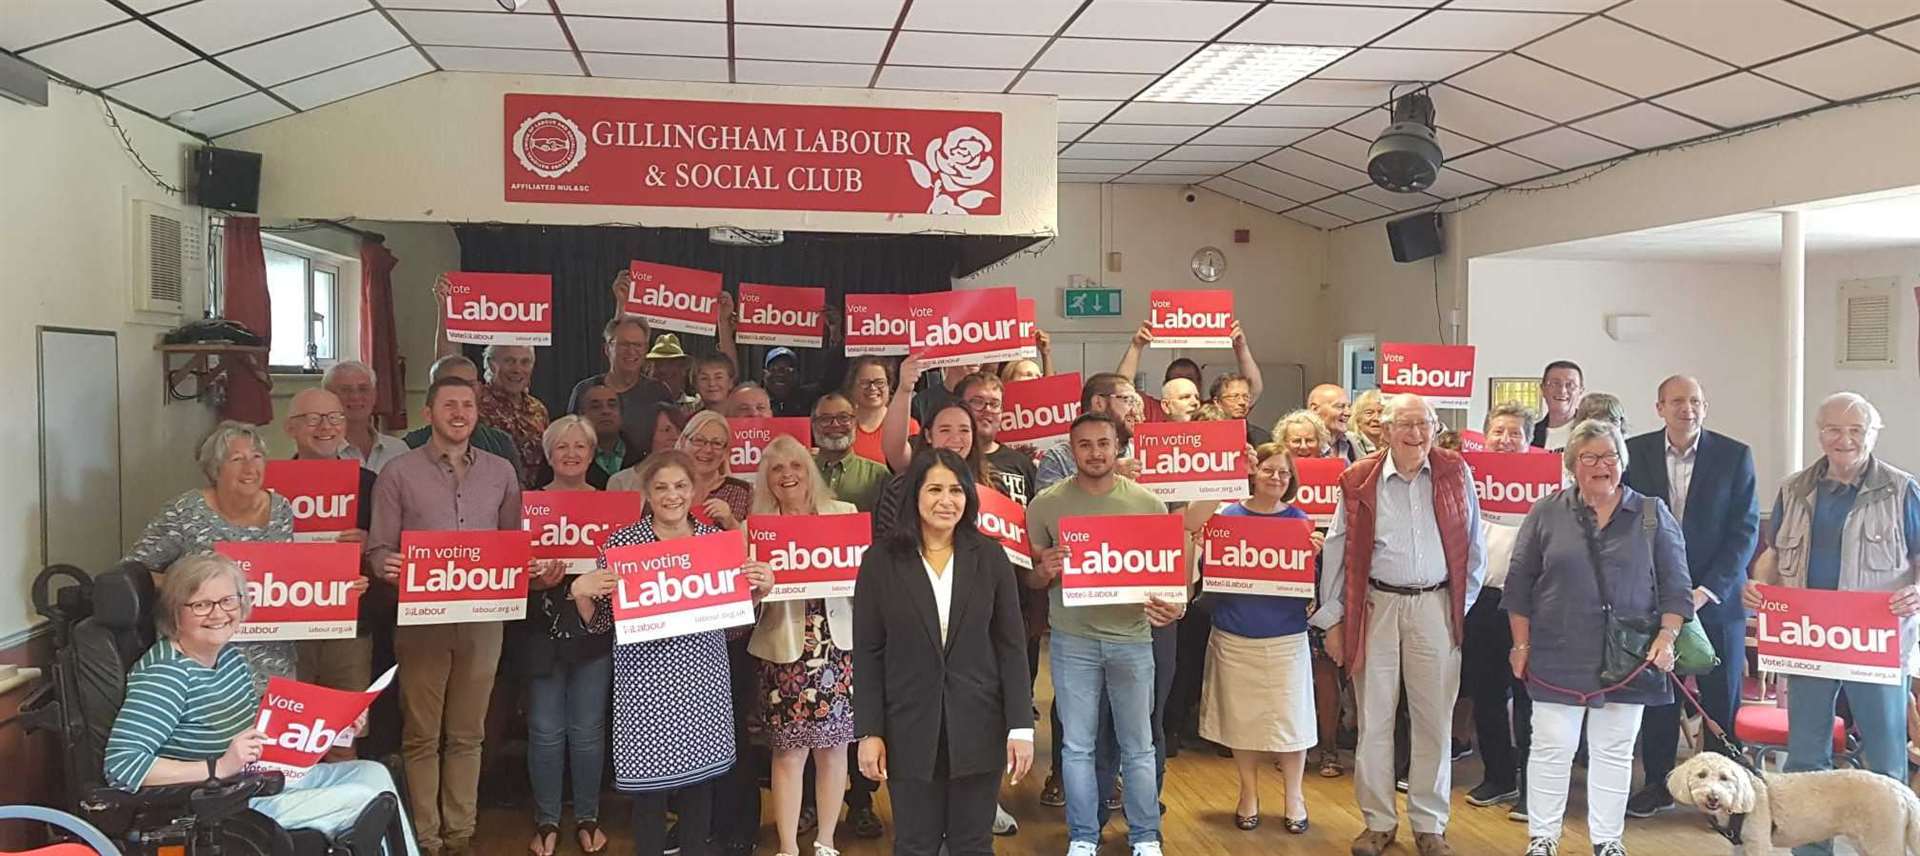 Labour's Naushabah Khan to stand as parliamentary candidate for Gillingham and Rainham